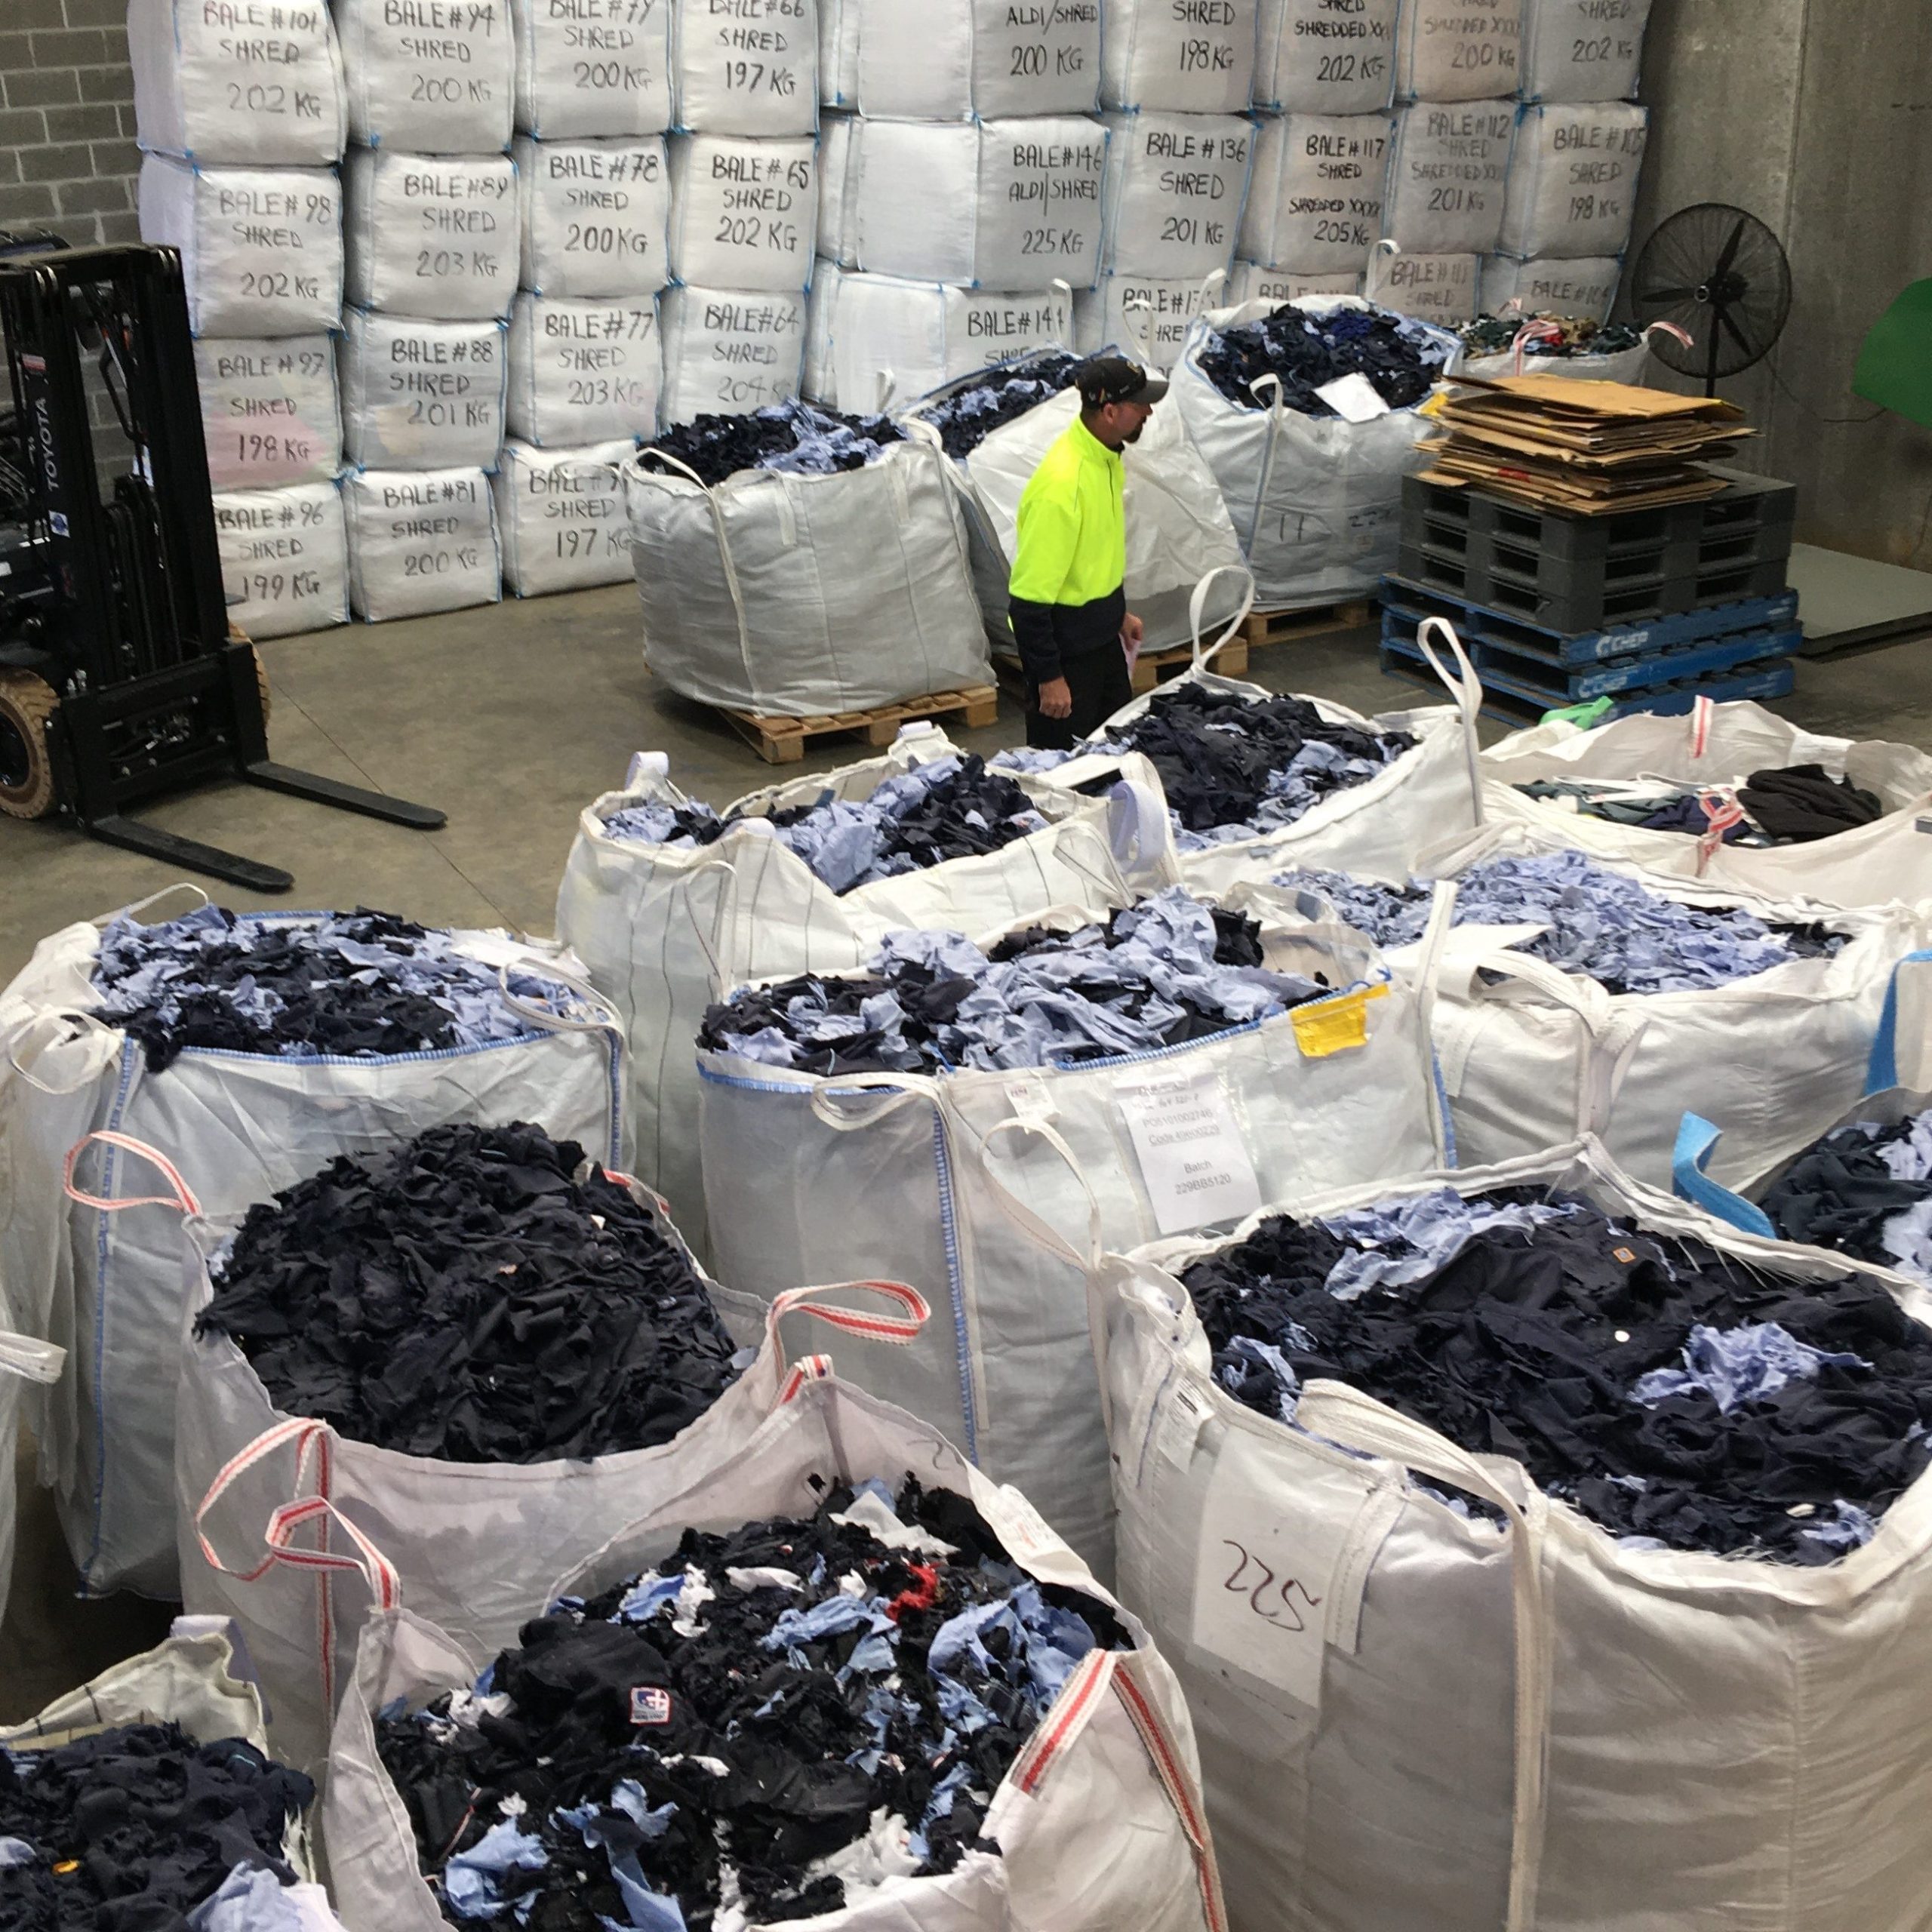 Sustainable Uniforms and Uniform Recycling - an image of inside a textile recycling warehouse. Old uniforms are pictured within bags awaiting recycling.